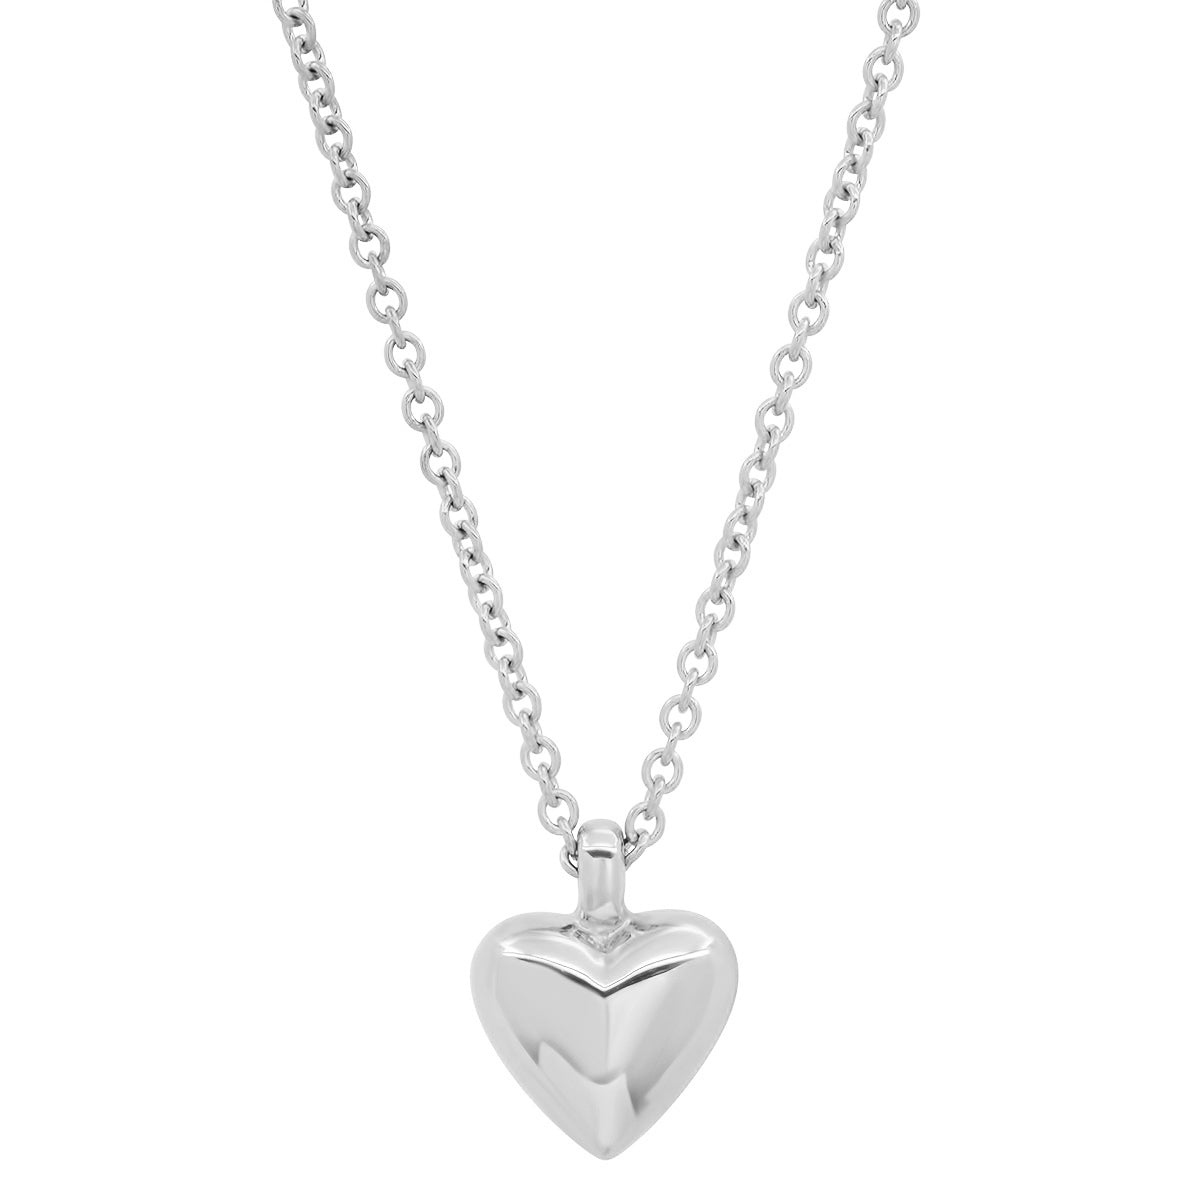 14K White Gold Mini Reversible Diamond and Gold Puffy Heart Necklace